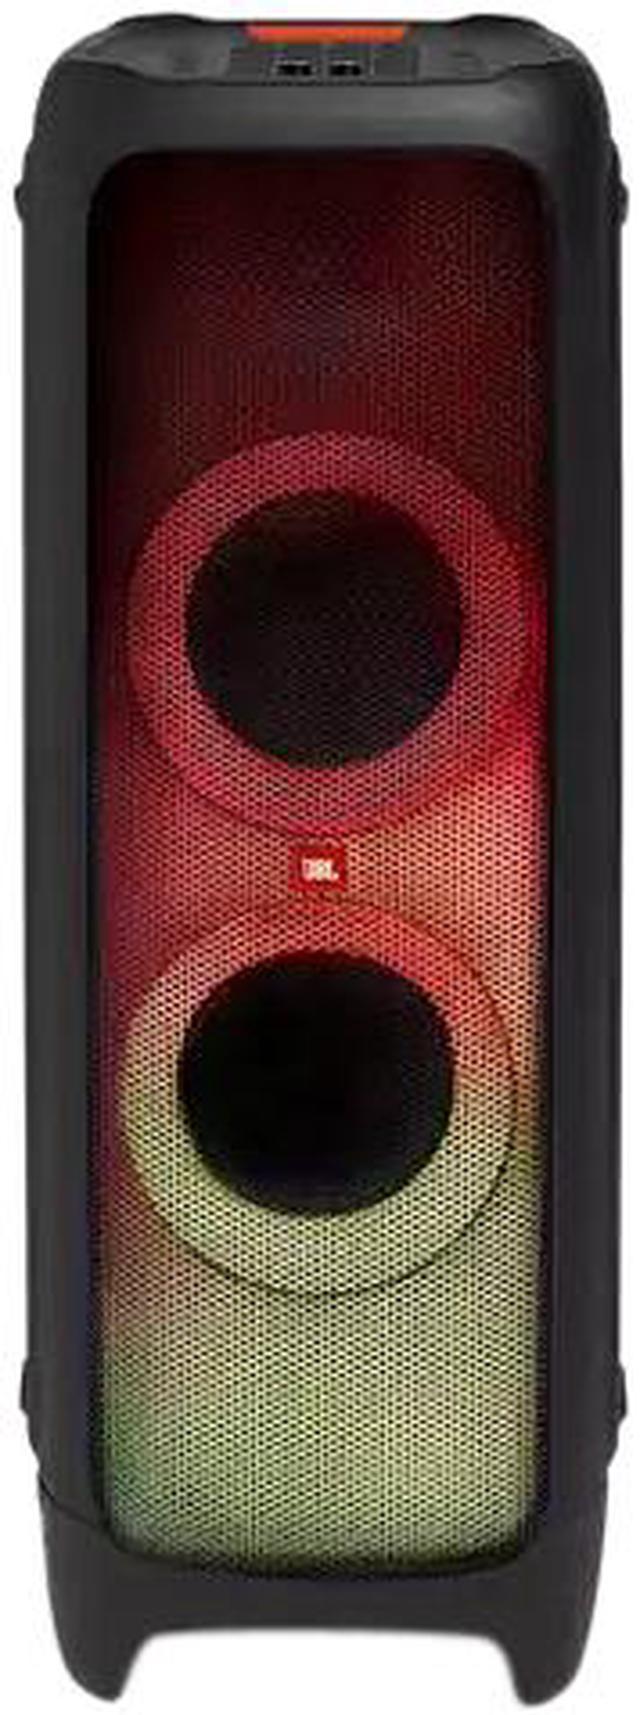 JBL Partybox 1000 Output power 1100w